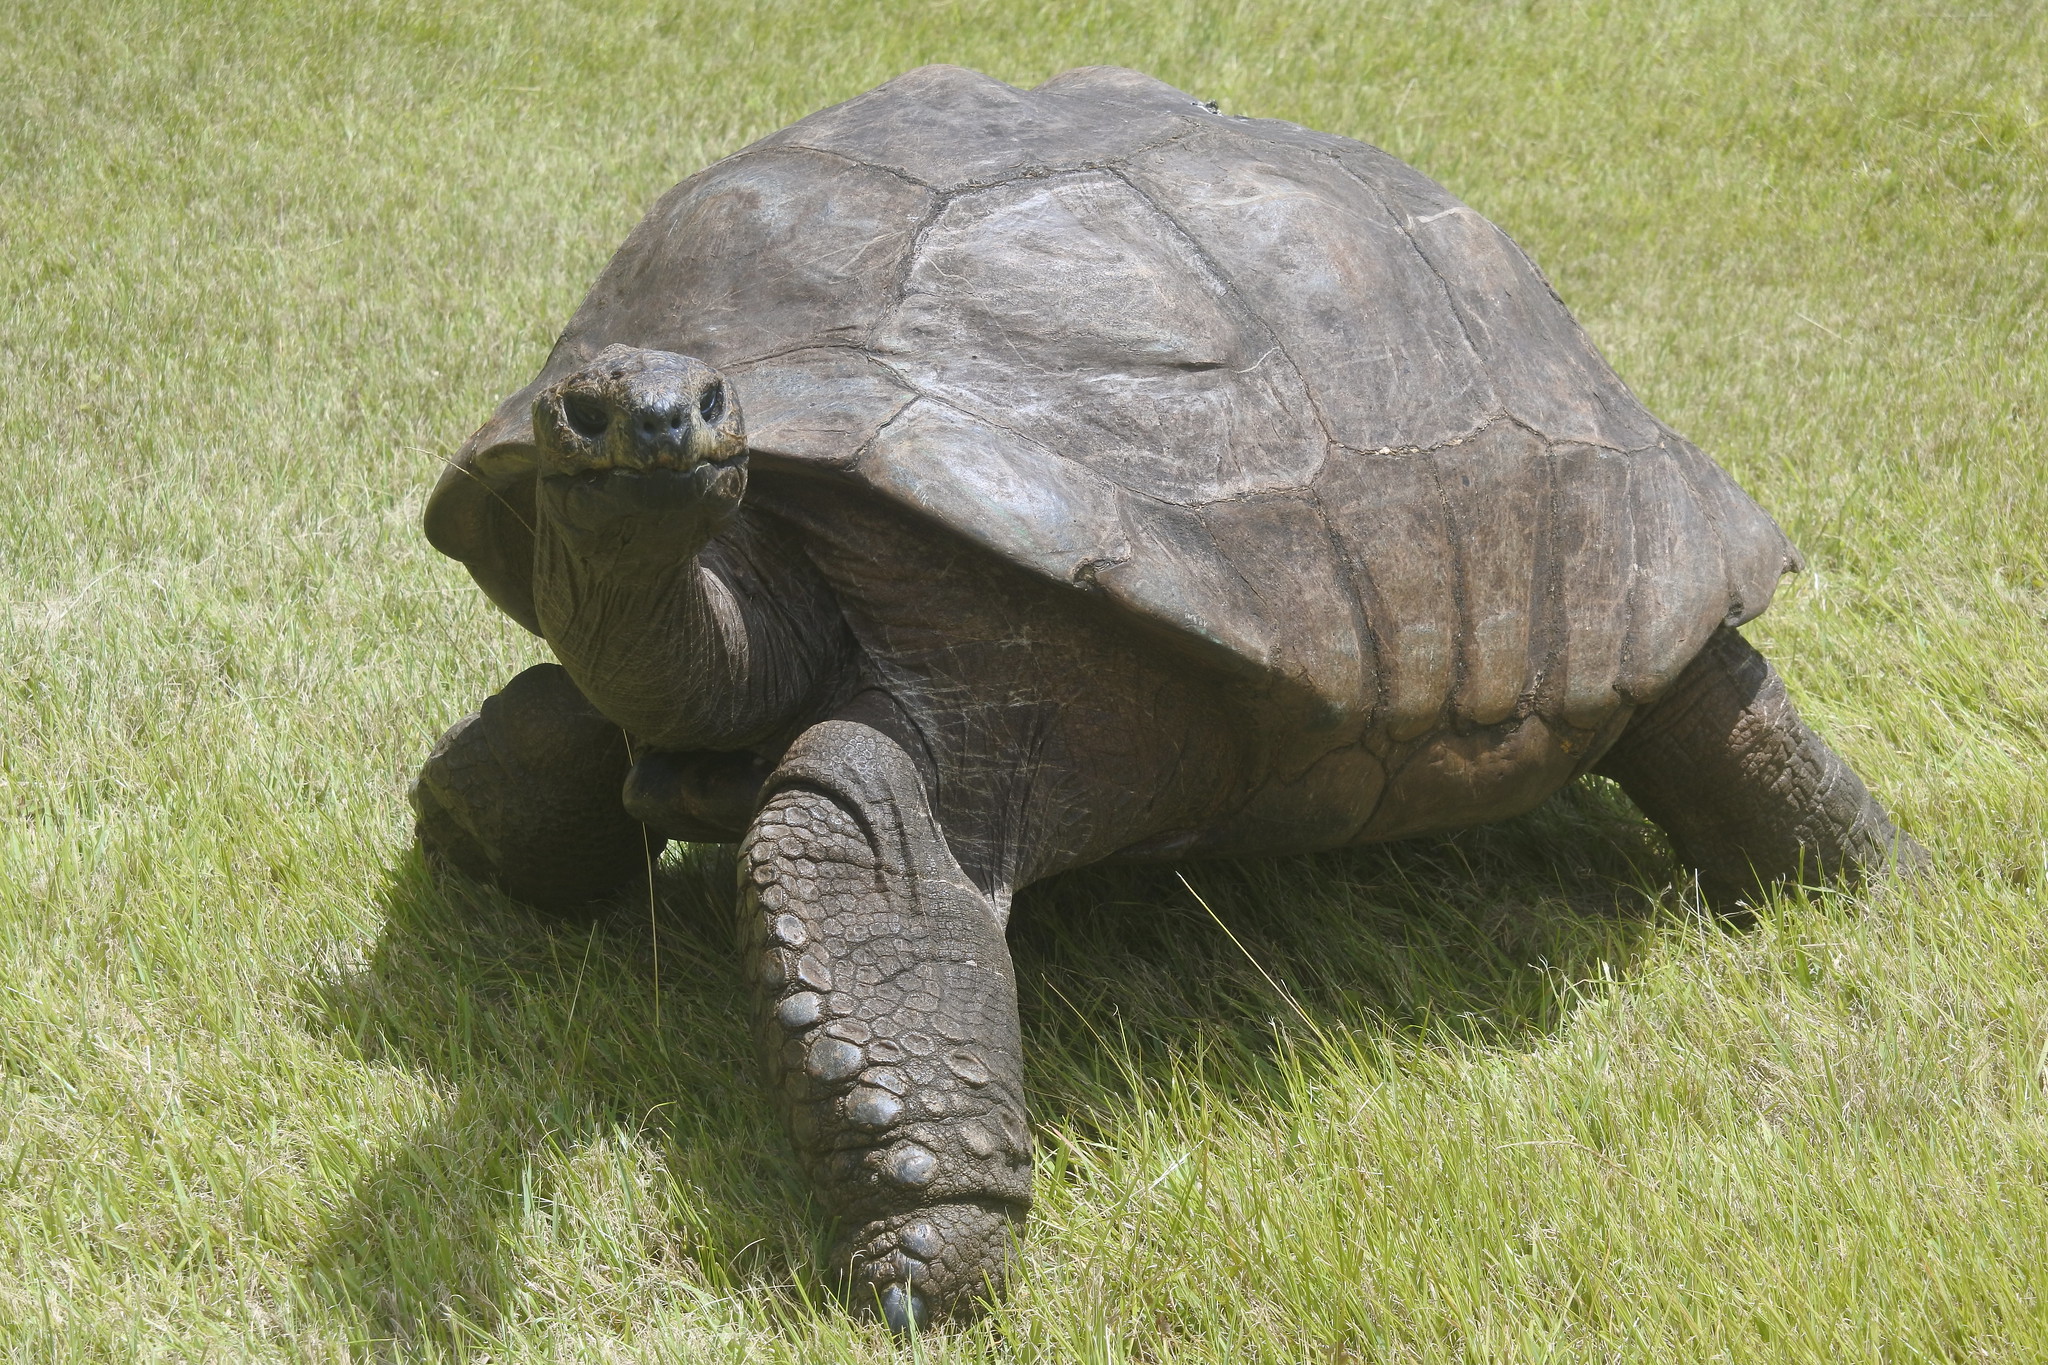 Jonathan, the oldest tortoise in the world, turns 190

